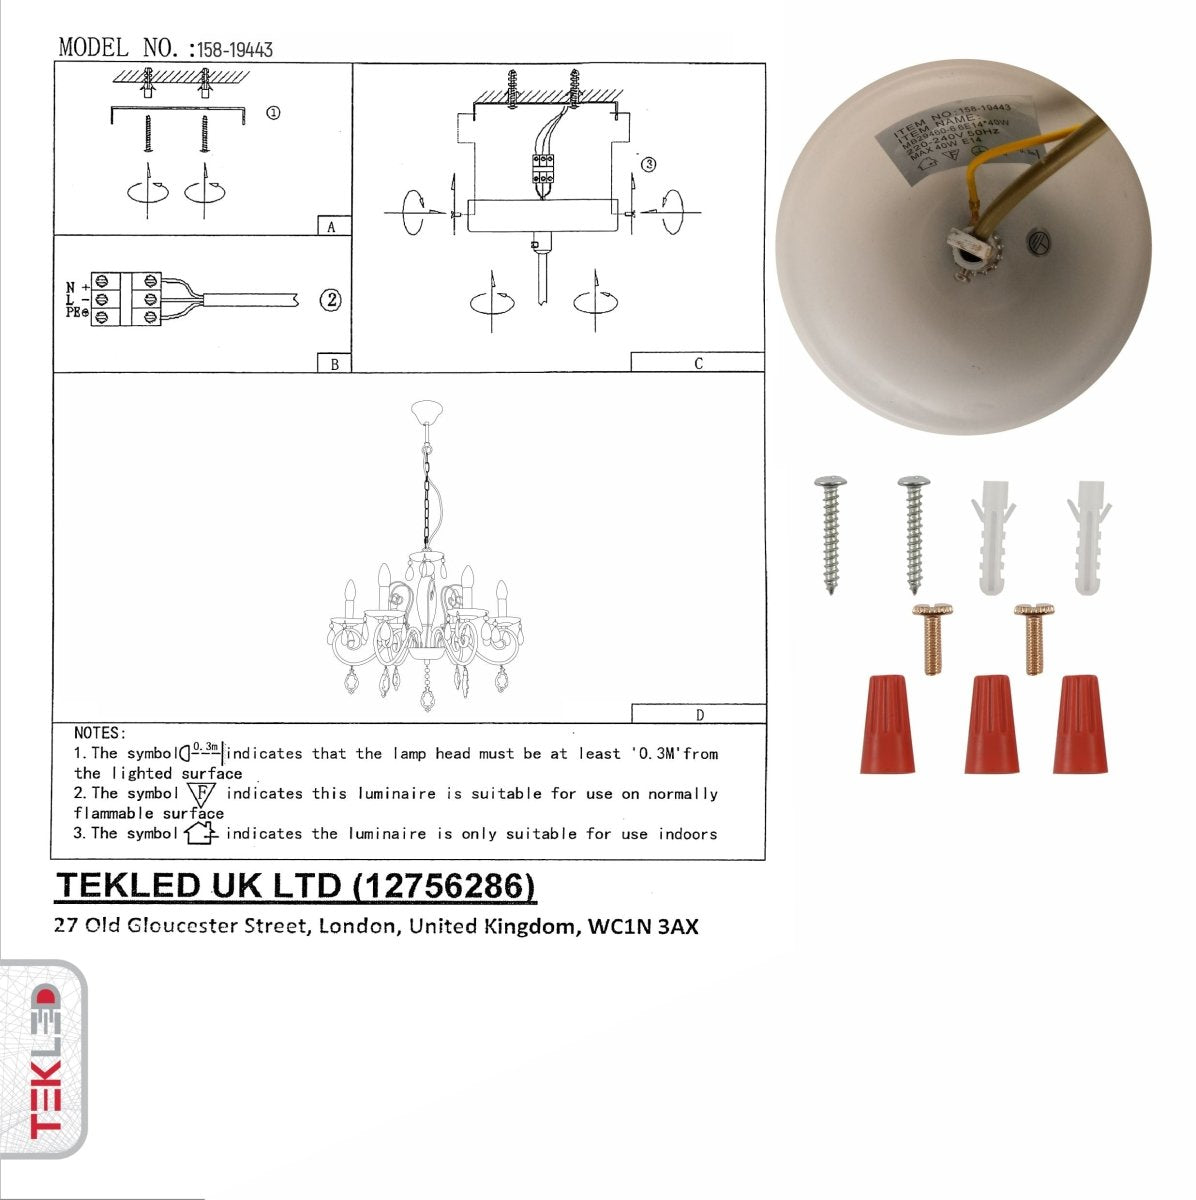 User manual for Amber Crystal Gold and White Metal 6 Arm Chandelier with E14 Fitting | TEKLED 158-19443